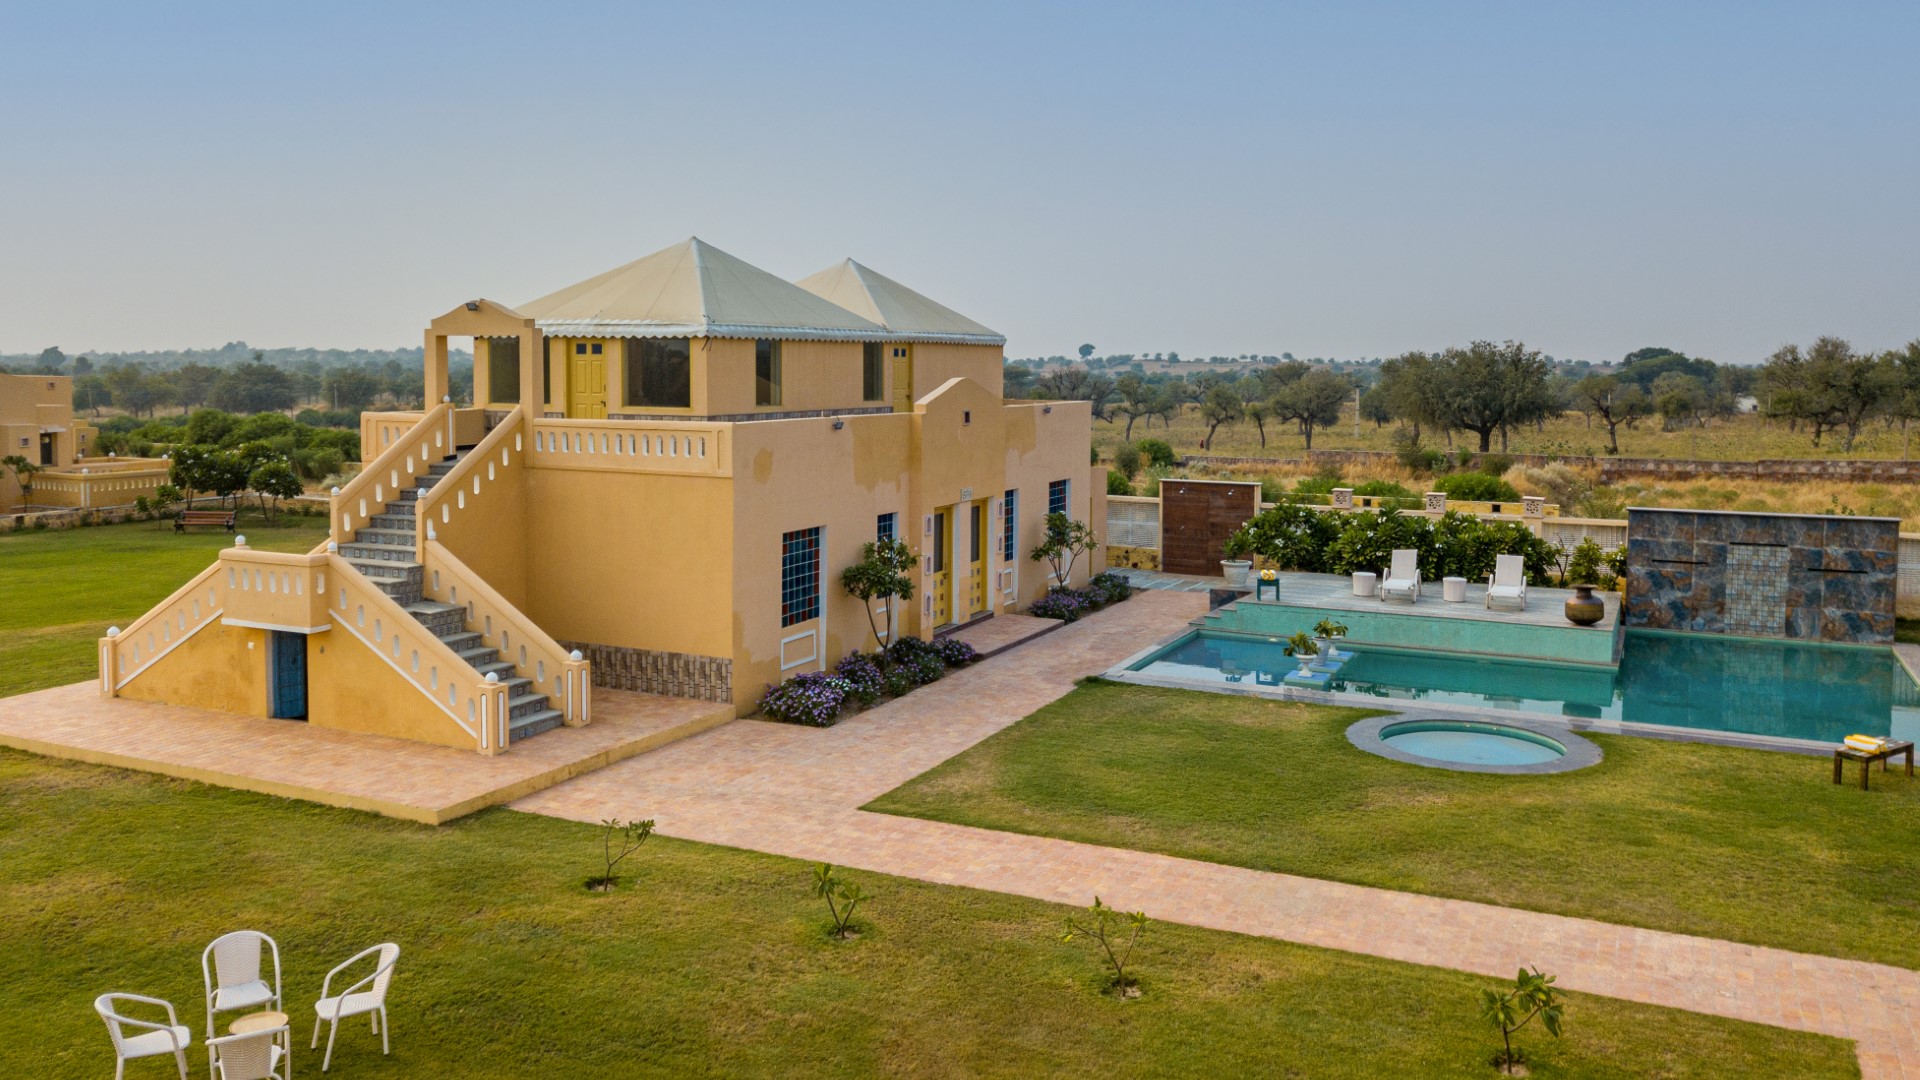 Anand Bagh Resort & Spa a Unit of Shekhawati Projects Pvt Ltd Blog Pictures